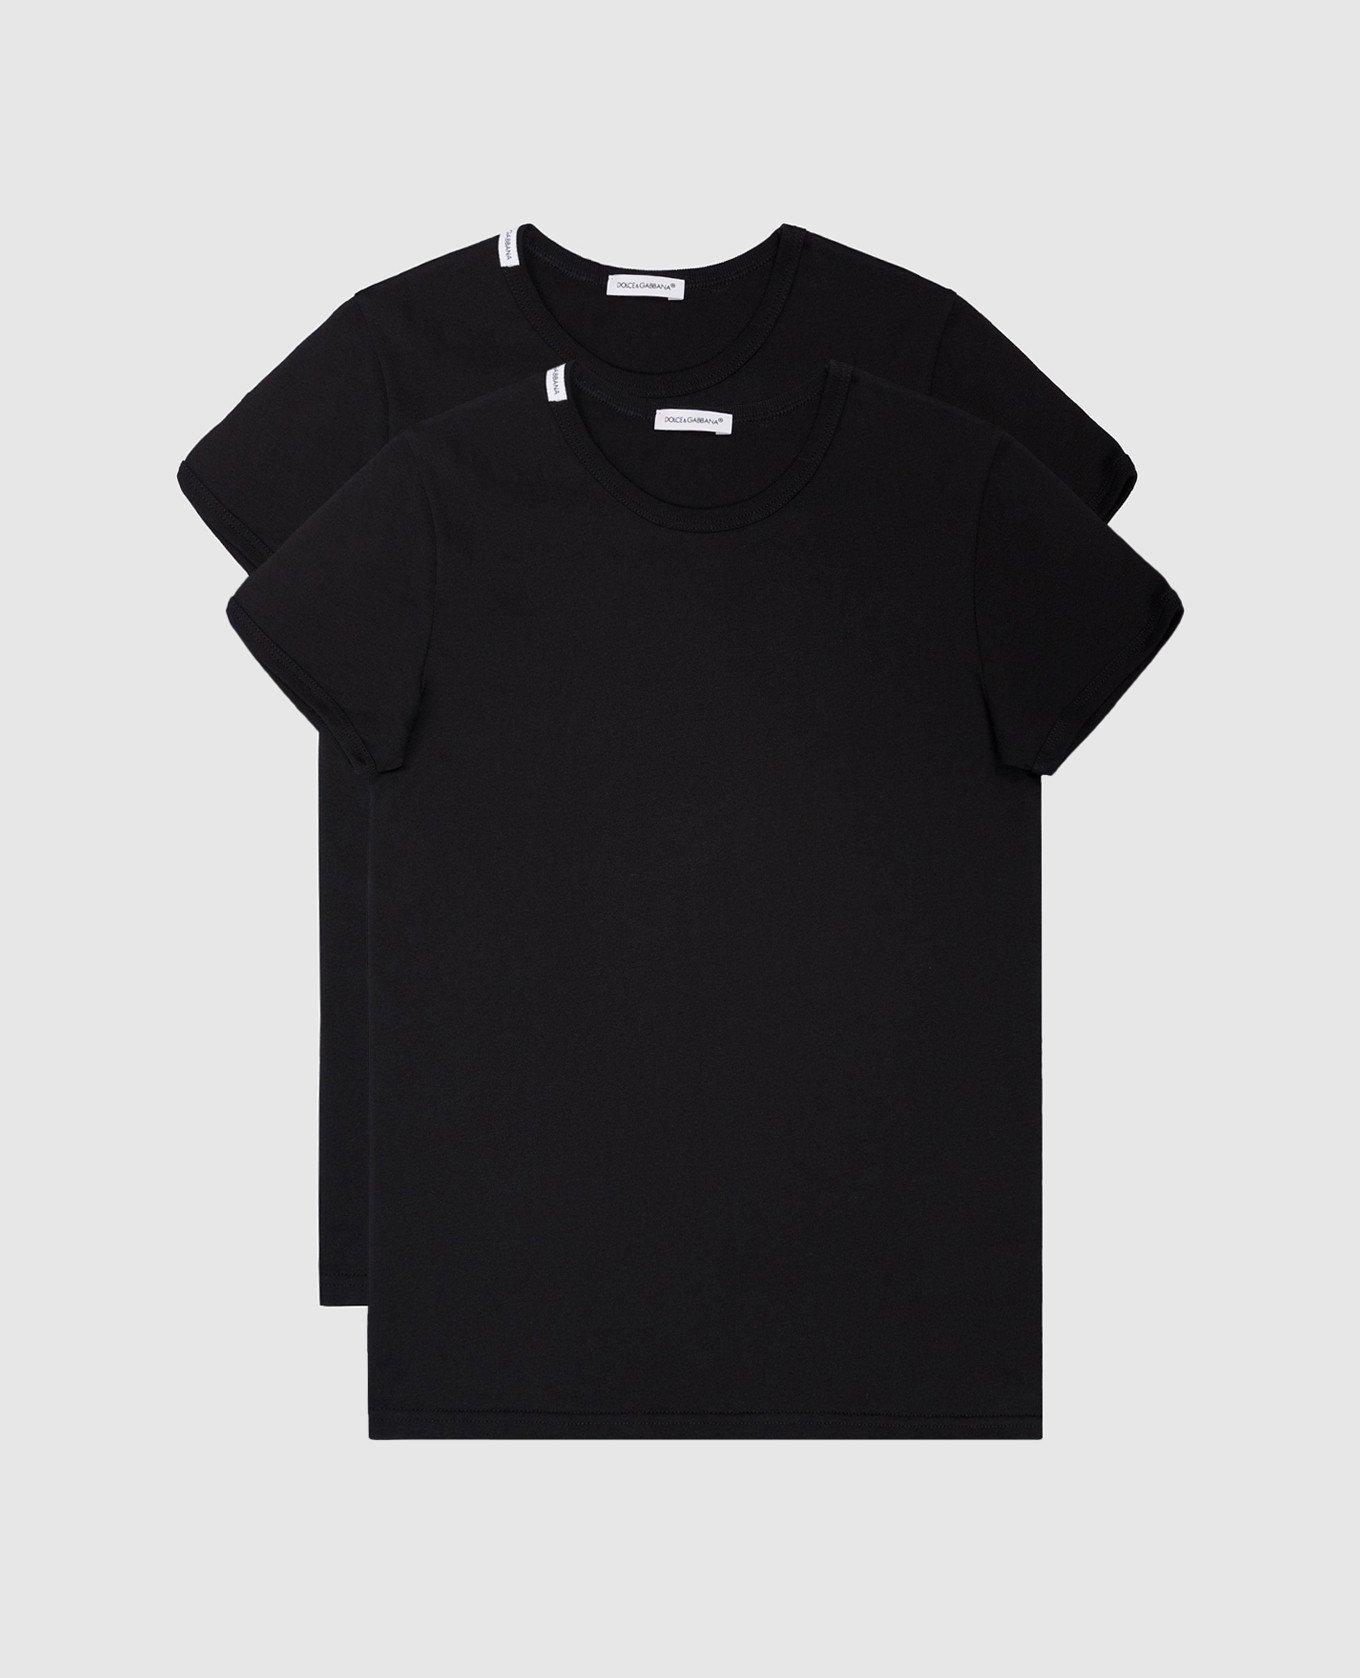 Children's set of black t-shirts with a logo